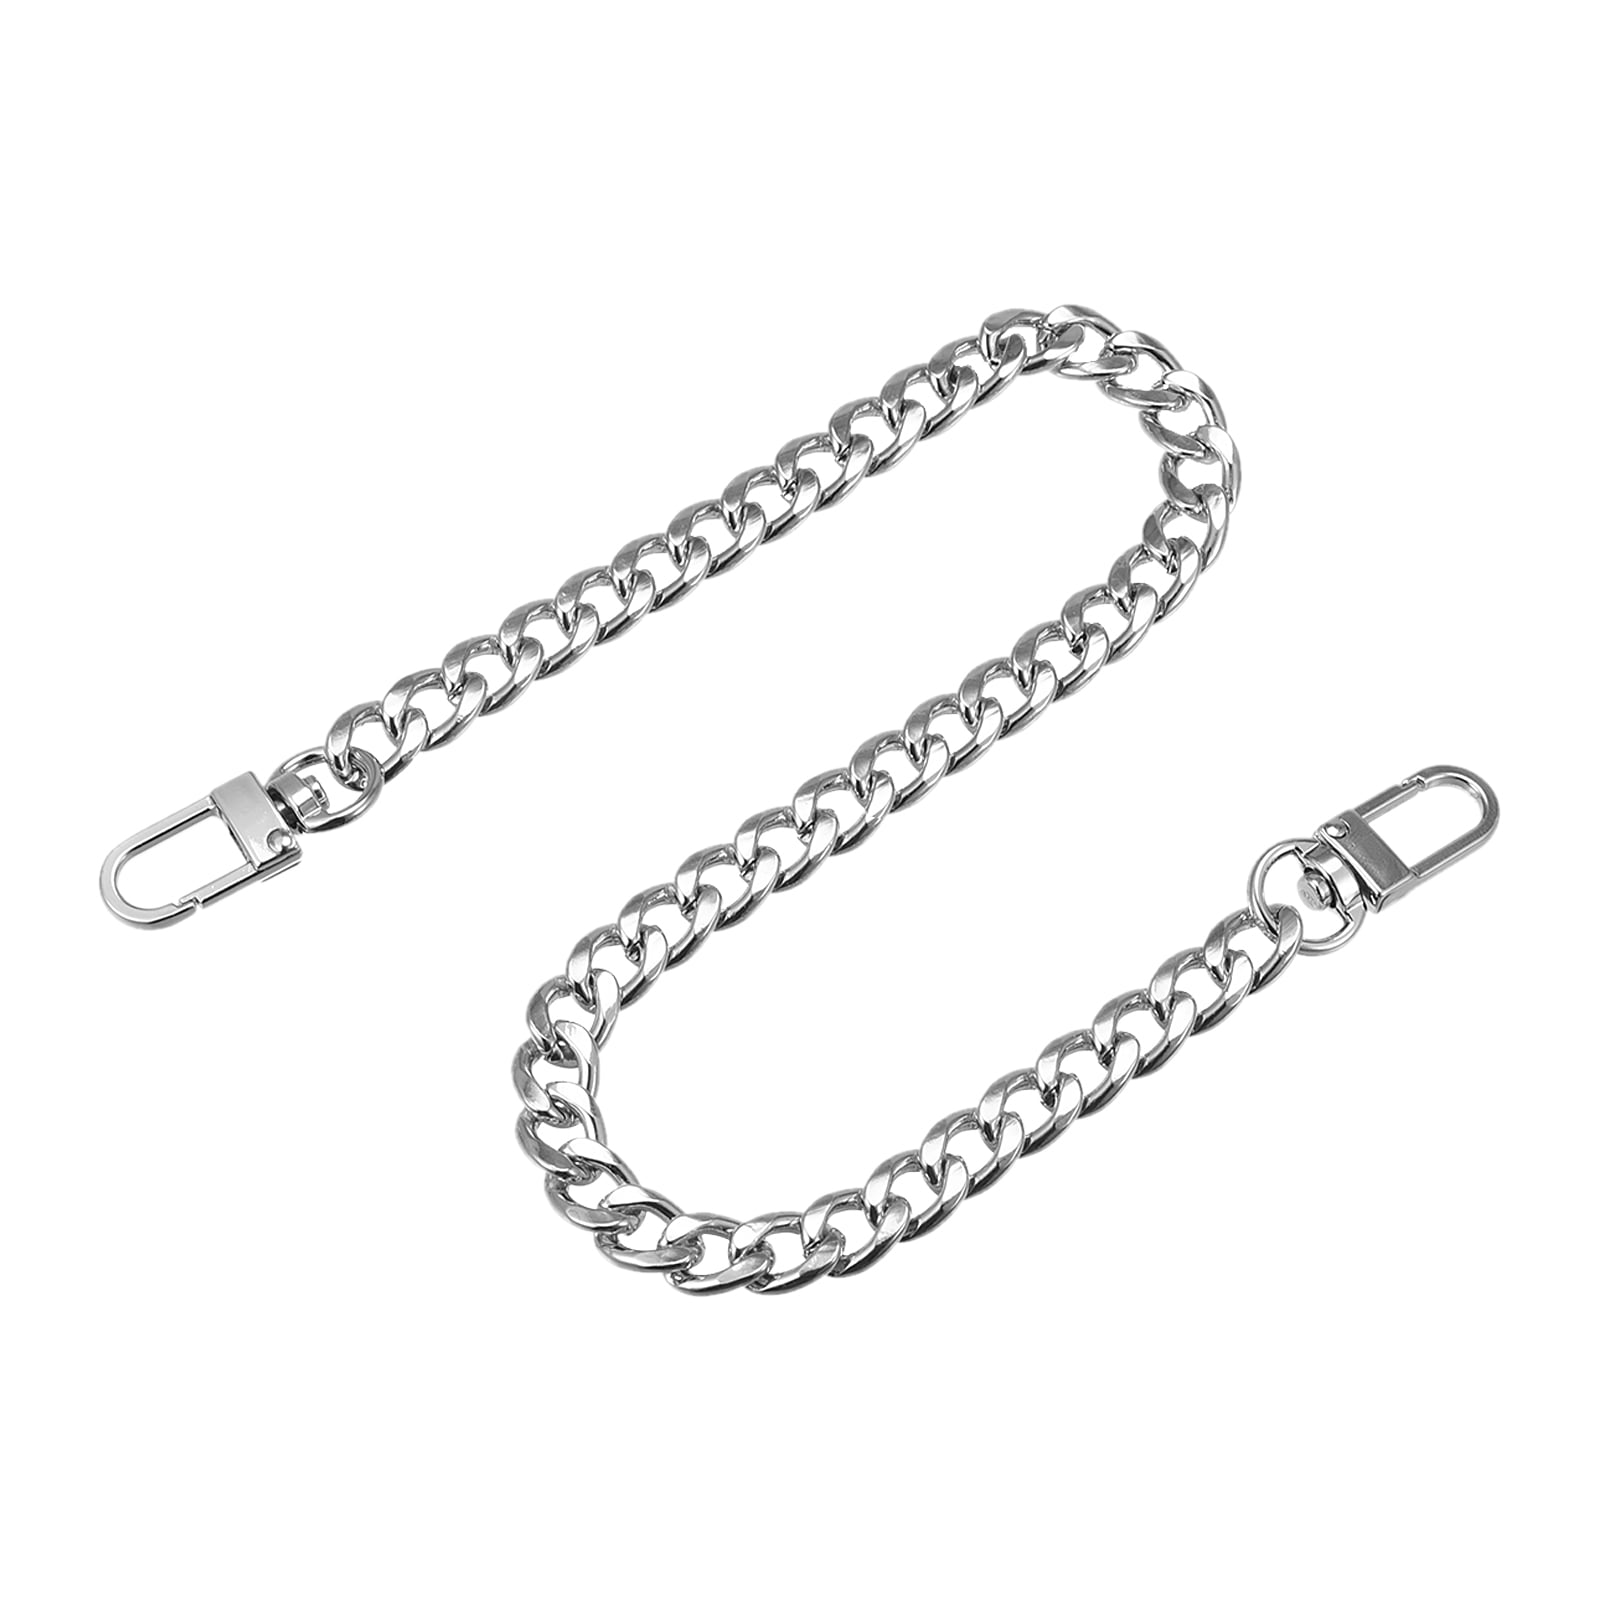 Shiny Metal Bag Chains Iron Flat Chains for Body Replacement